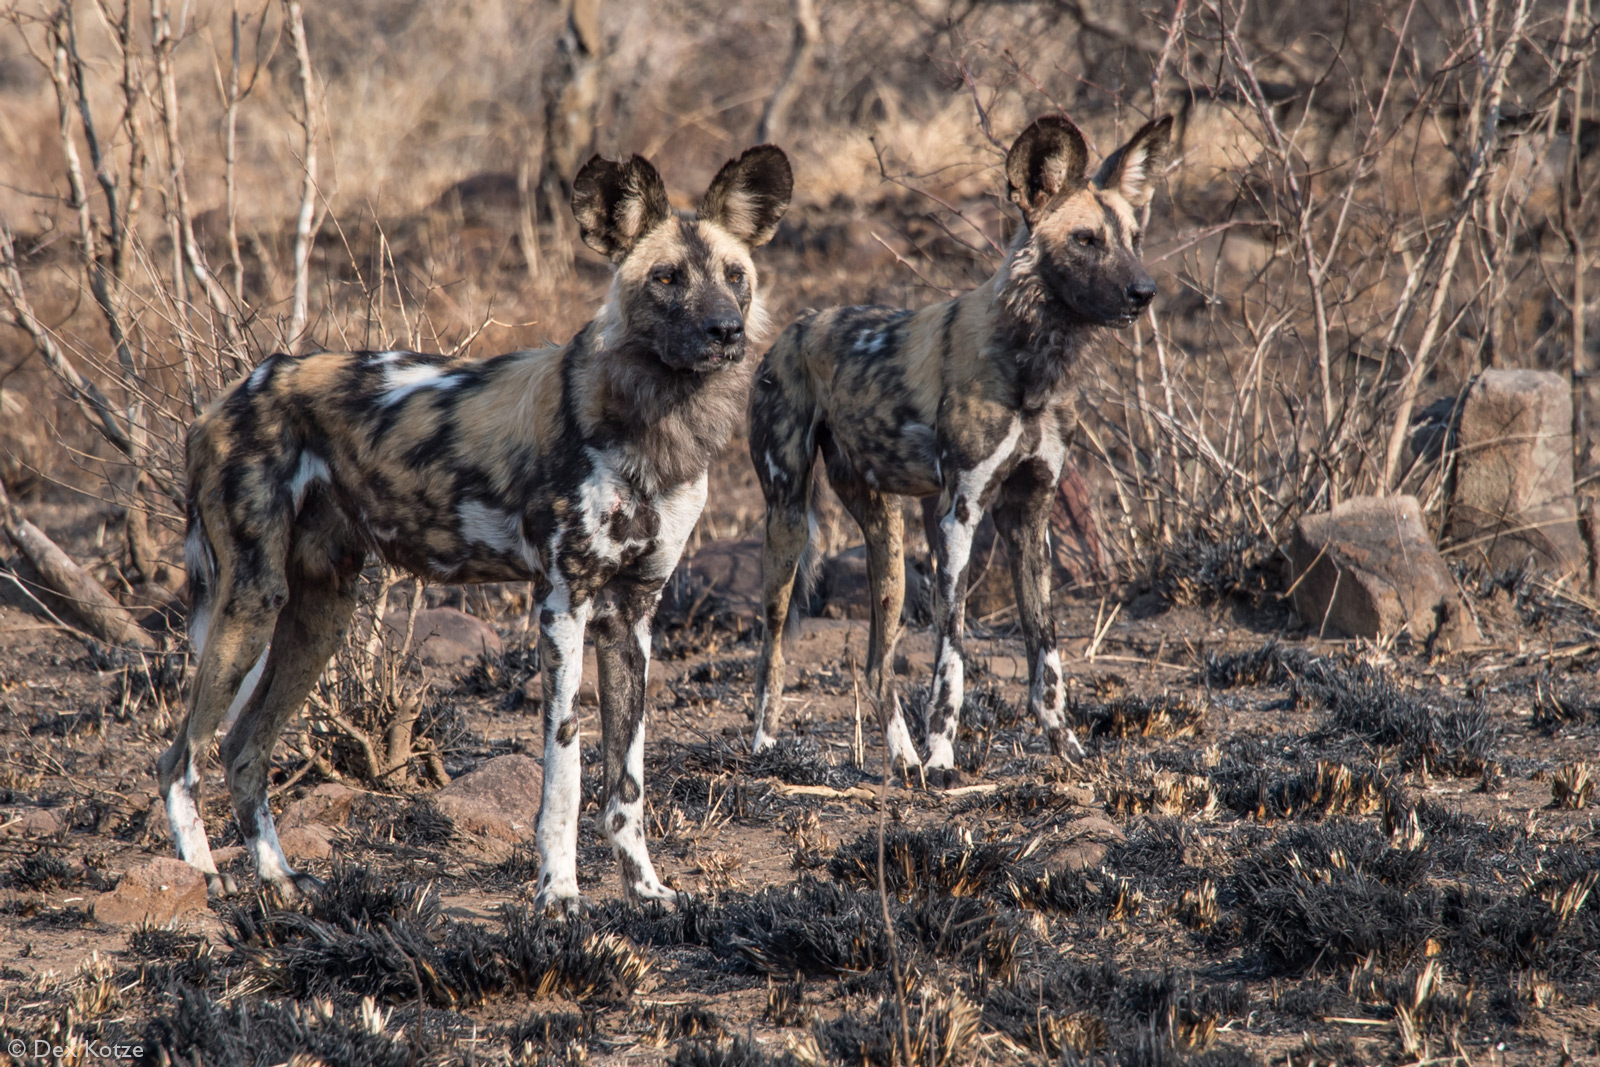 African wild dogs, or painted wolves